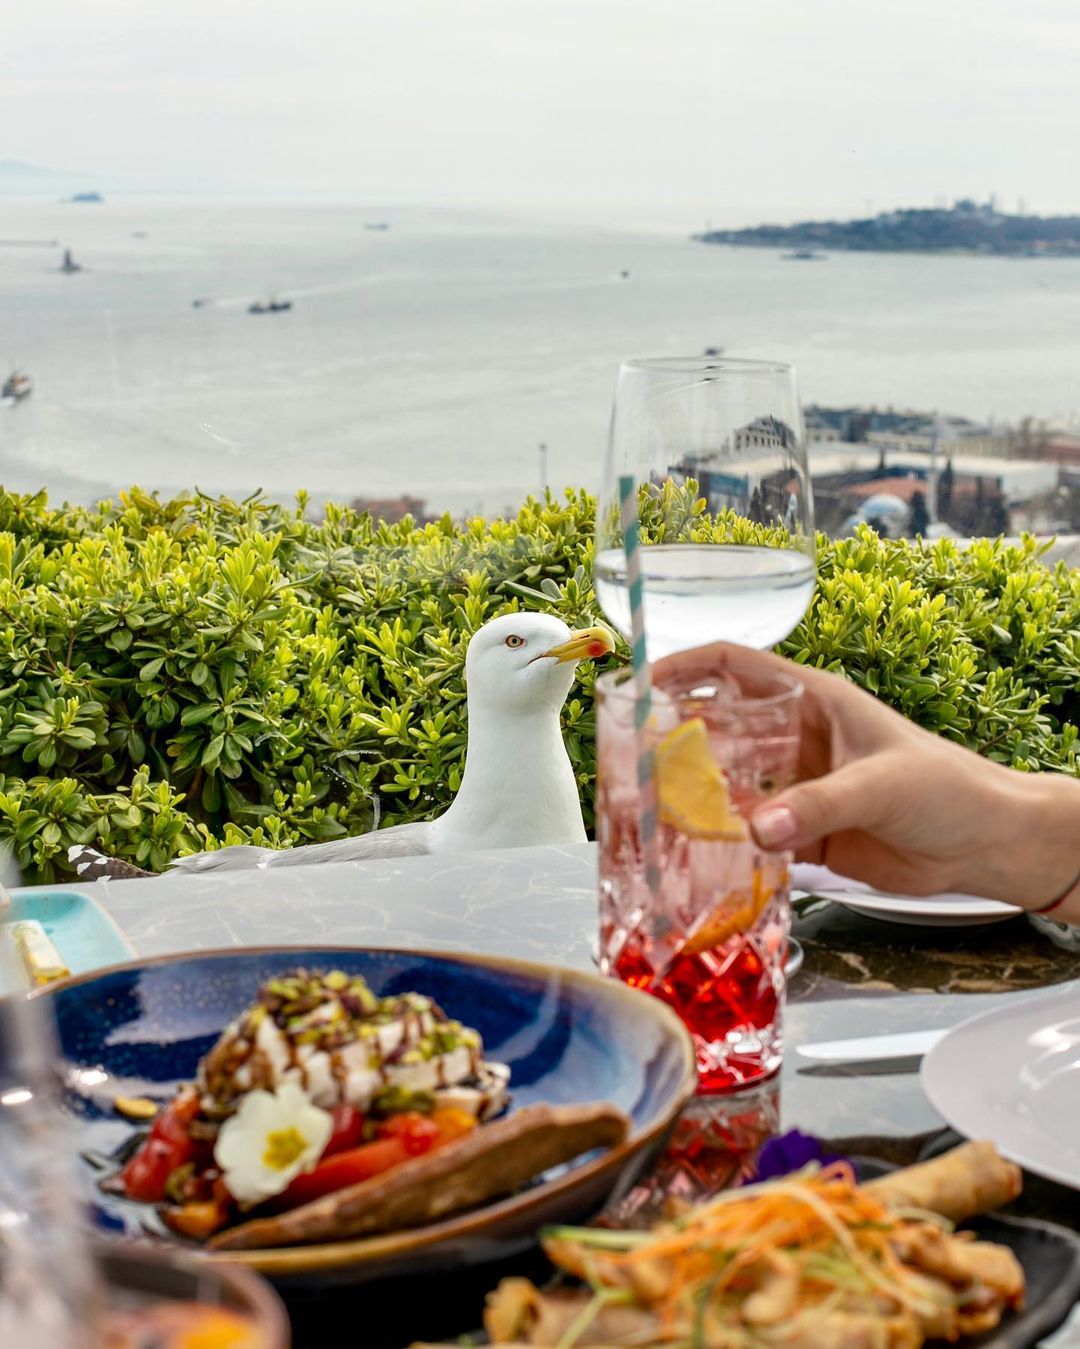 Making new friends while traveling 🐦 - always an unforgettable experience - Best Restaurants with Bosphorus View